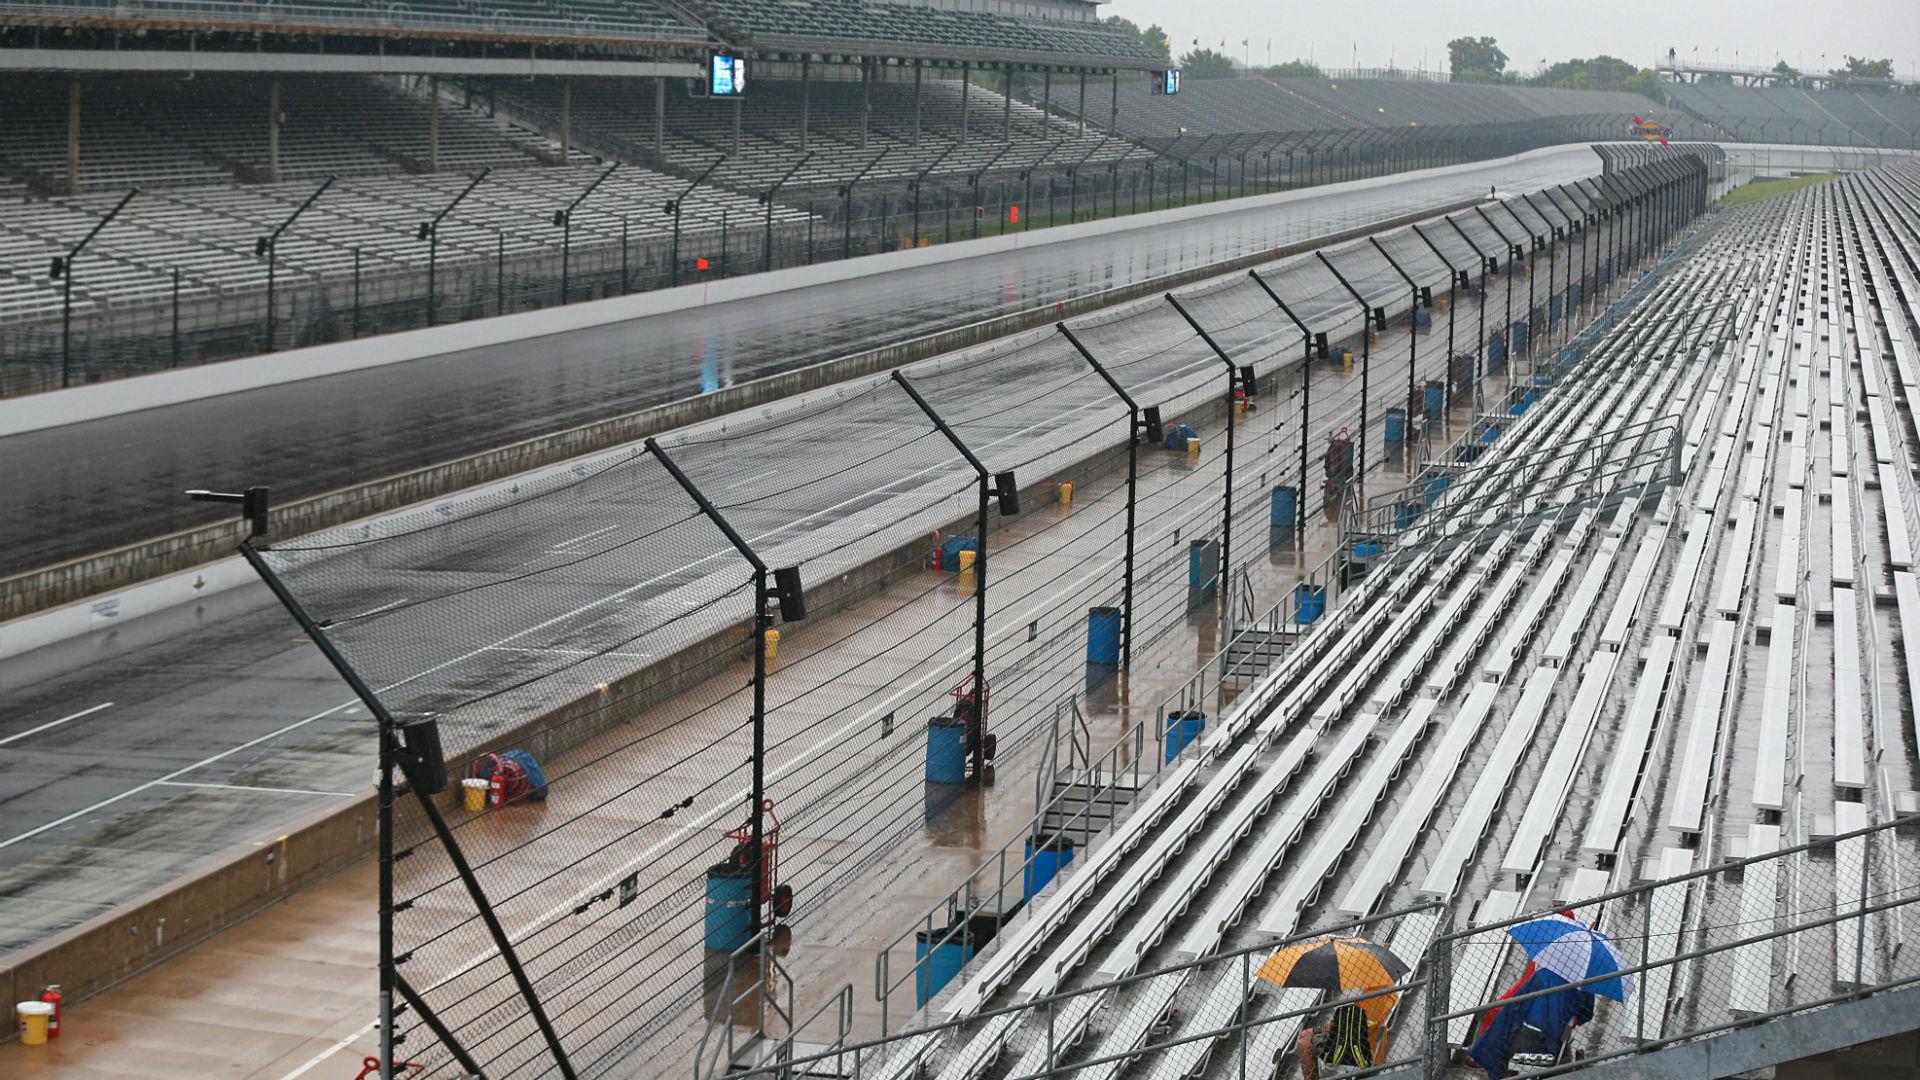 NASCAR's Saturday schedule at Indy rained out